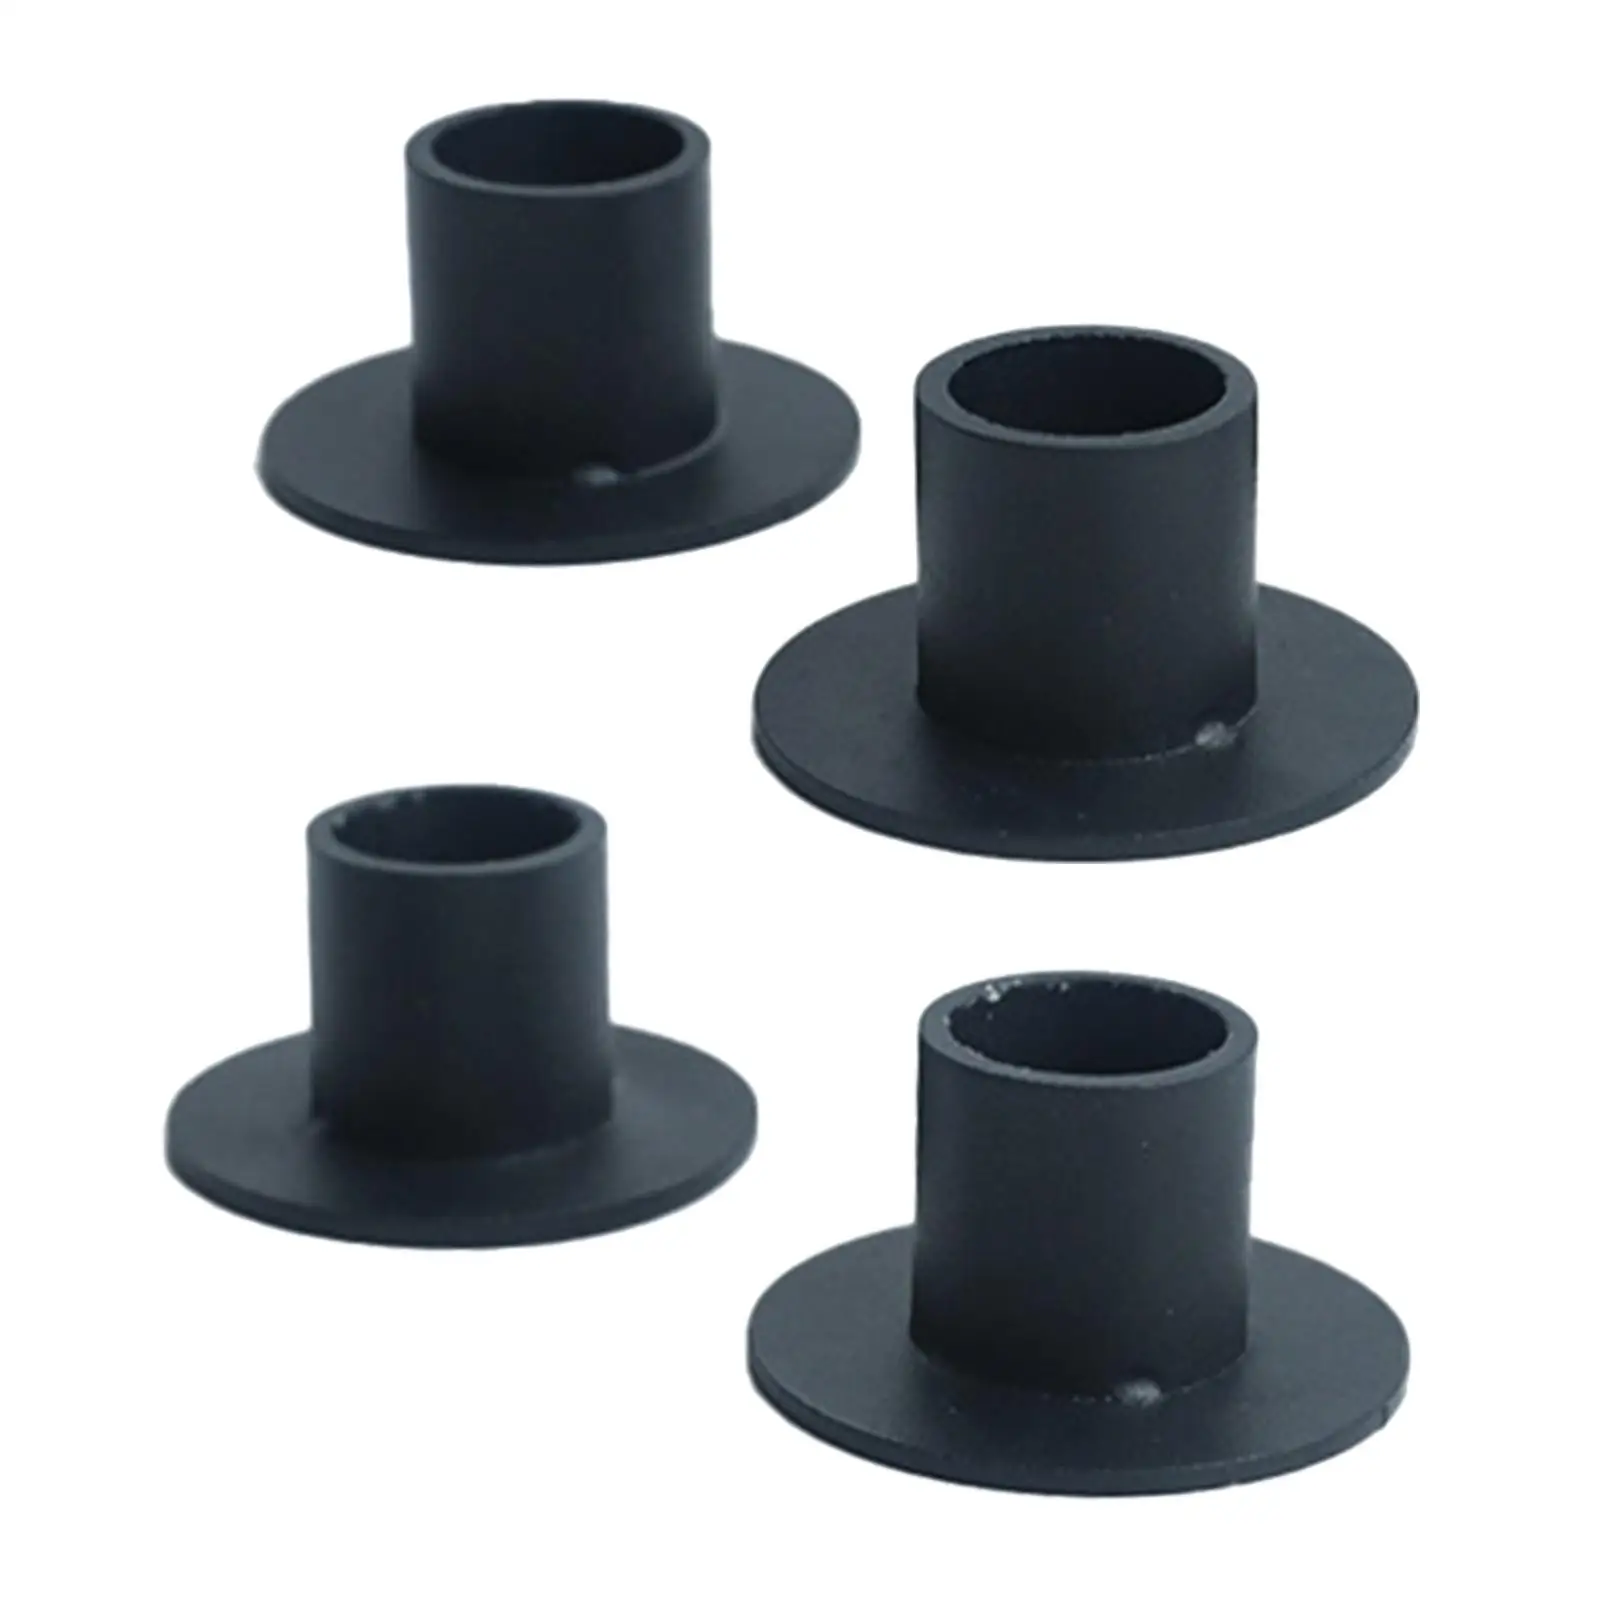 4x Candle Holders Candles Stand Decorative Candlestick Holders Stand for Mantel Party Supplies Wedding Centerpiece Dining Table